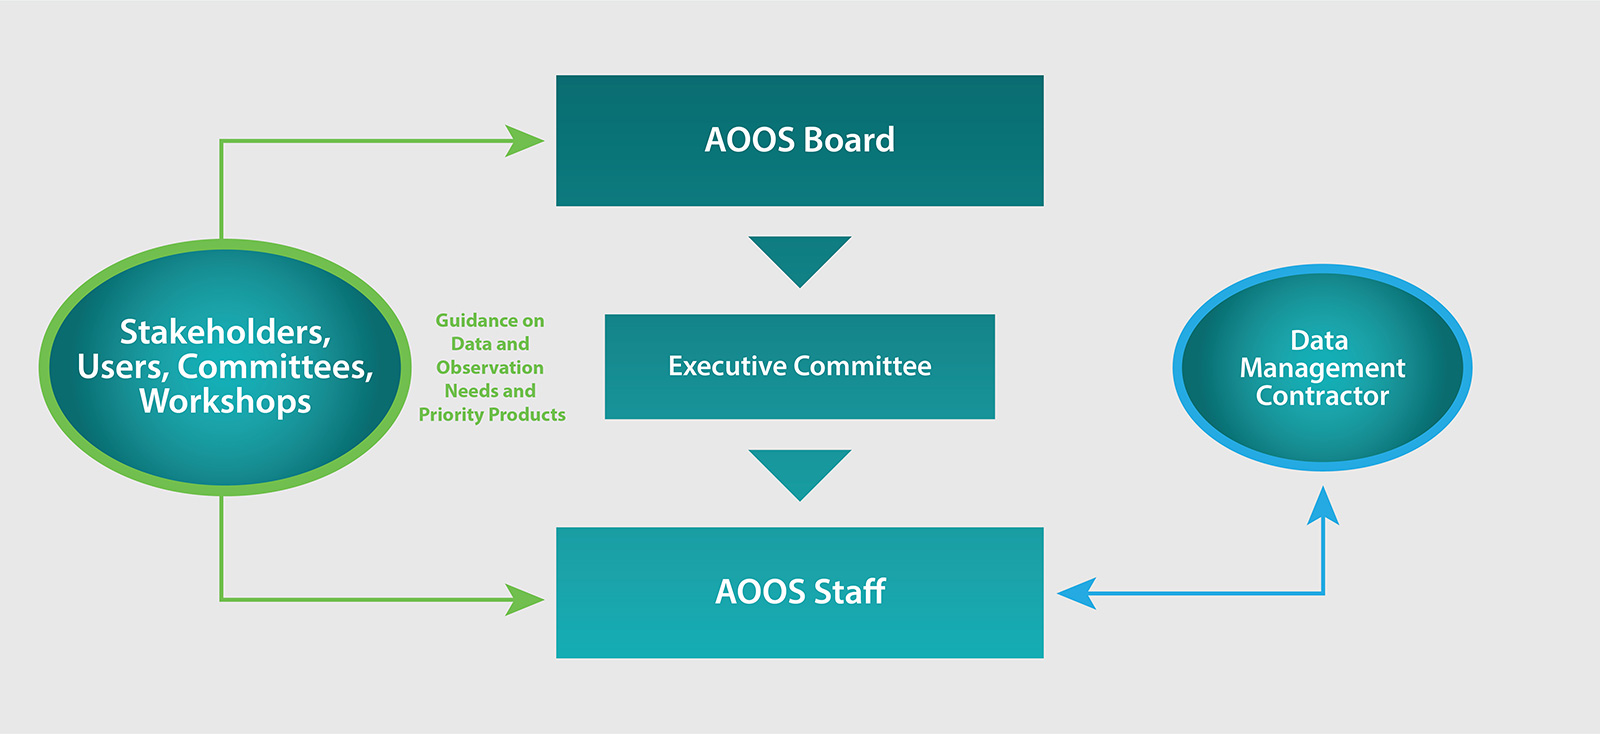 A graphic illustrating the AOOS organizational structure